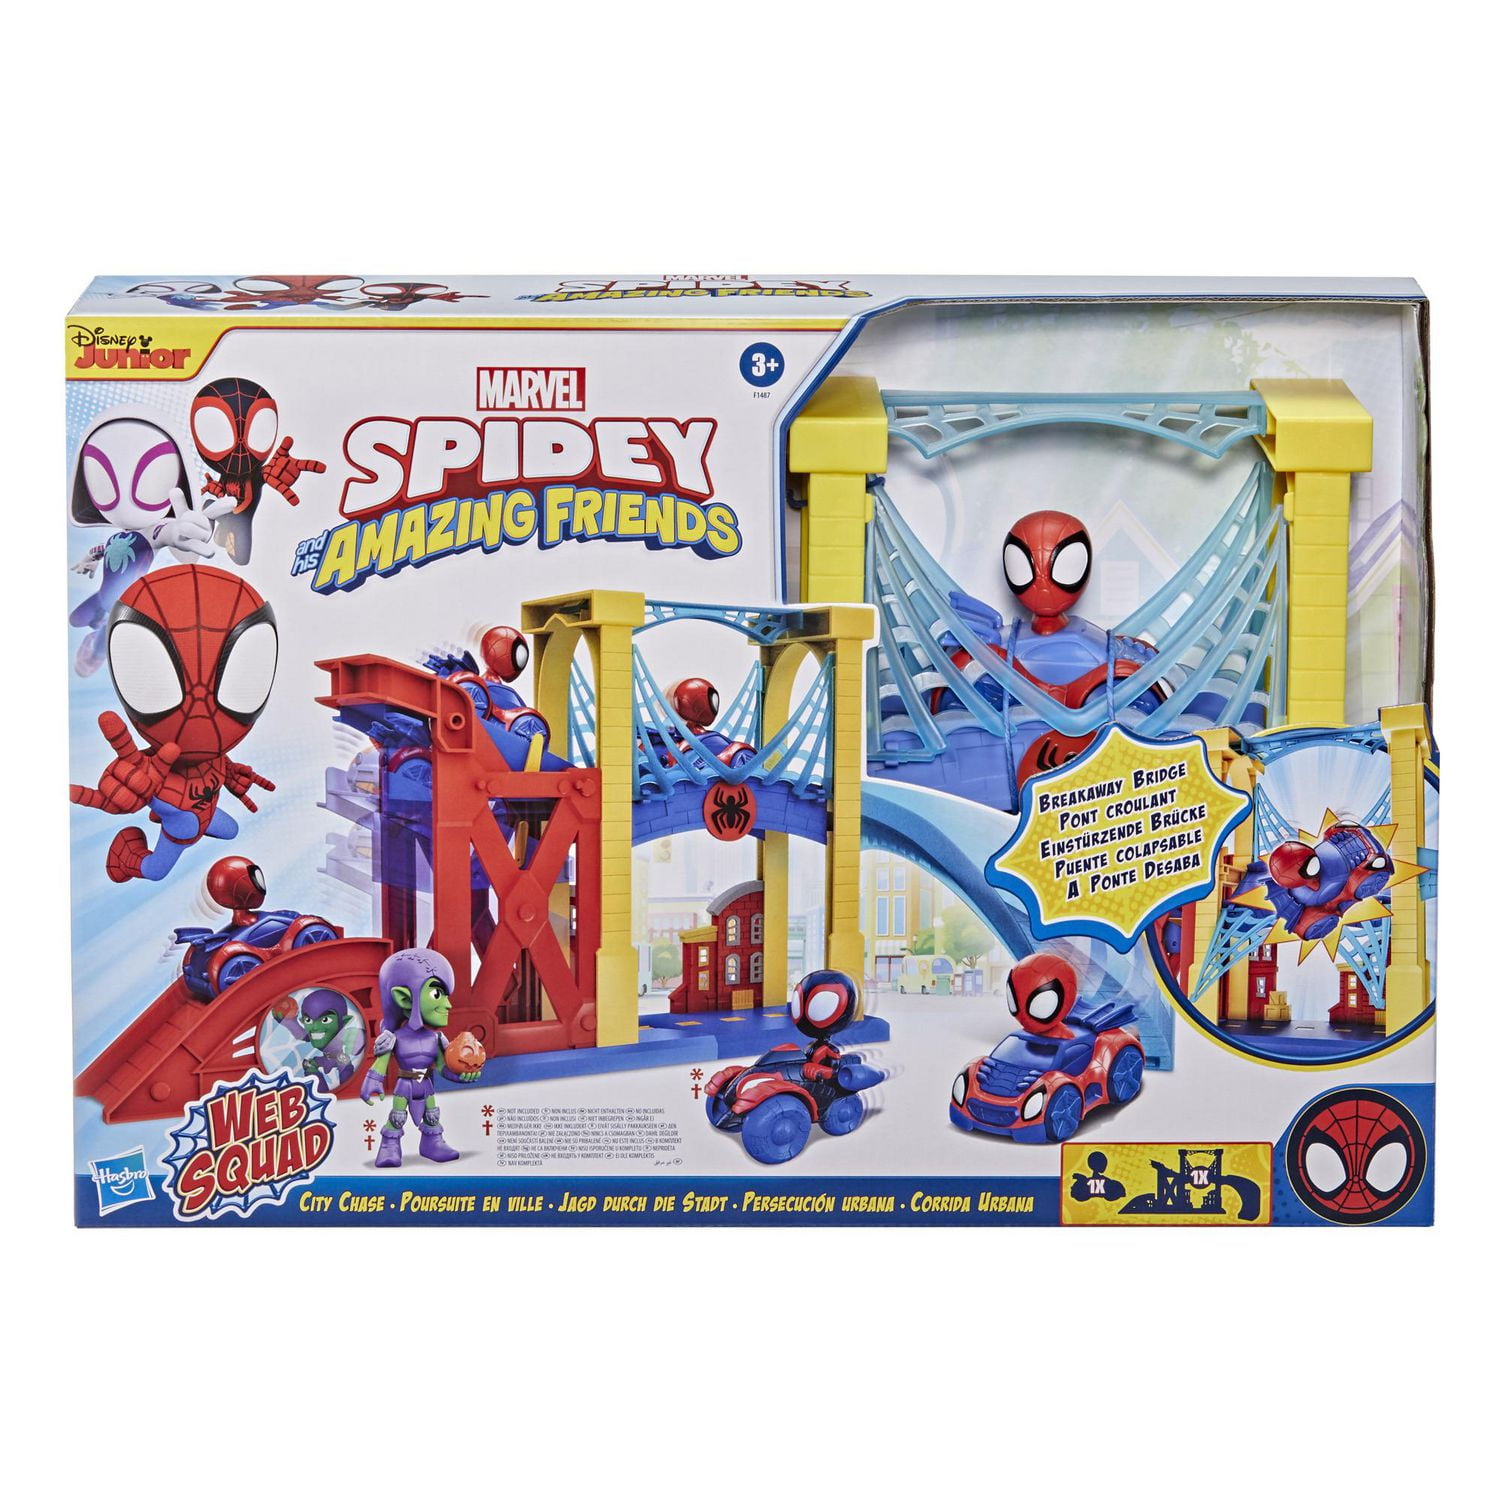 Marvel Spidey and His Amazing Friends Web Squad City Chase Playset,  Collapsing Bridge, Includes Spidey Racer Vehicle, For Kids Ages 3 and Up,  Ages 3 and up 